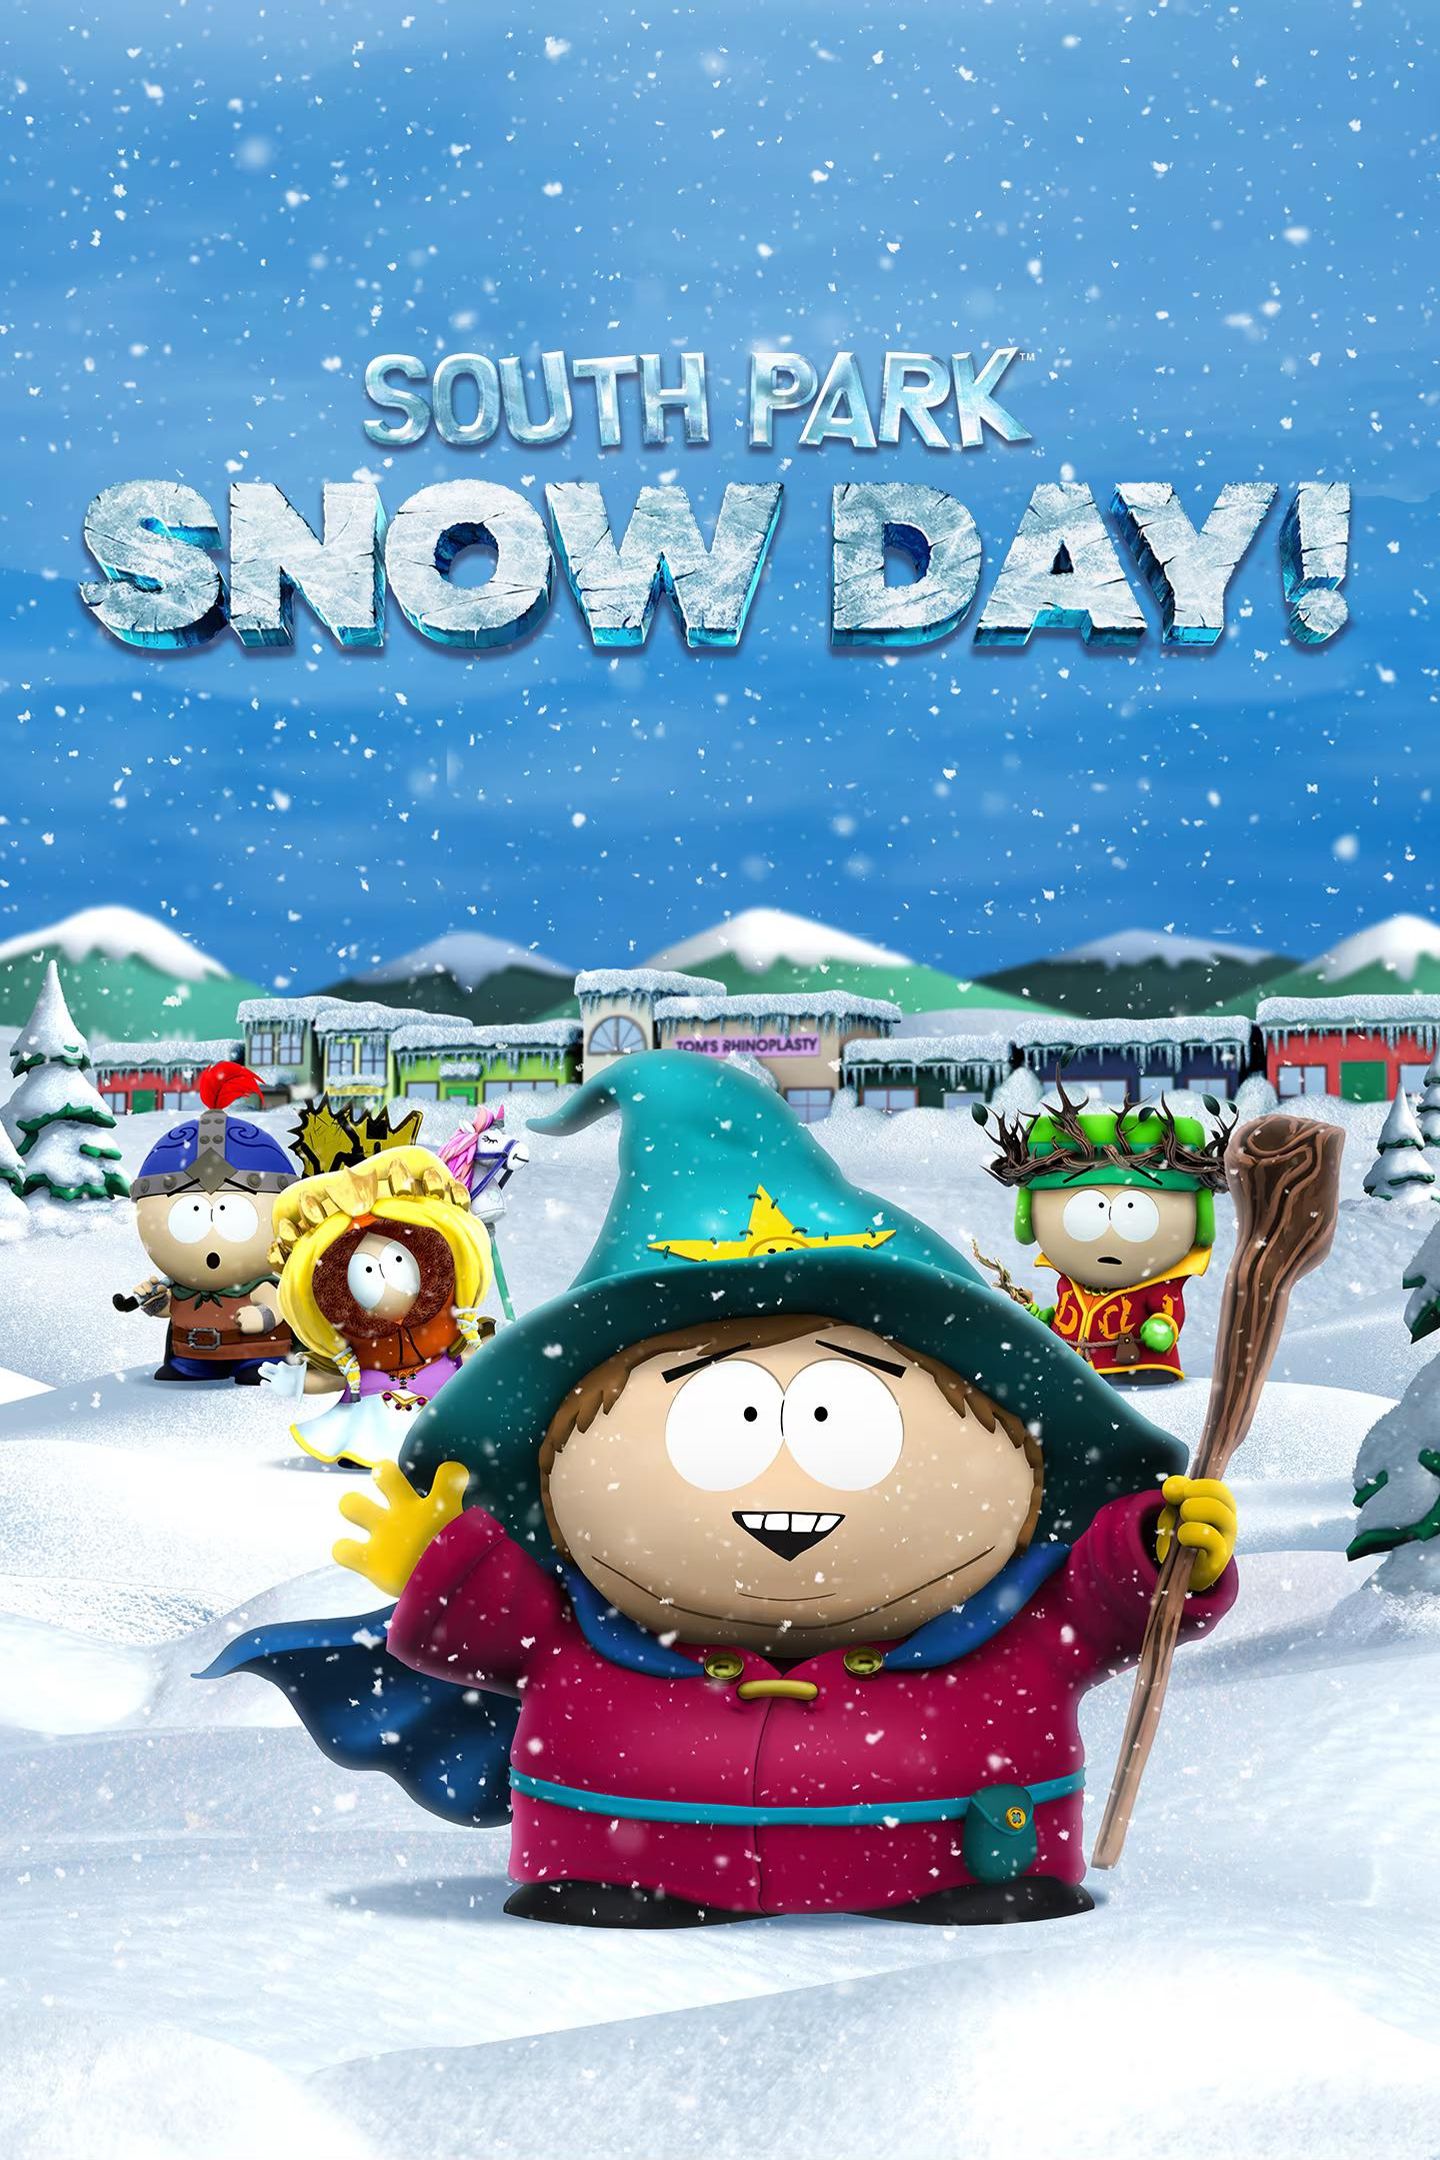 south park snow day image cropped